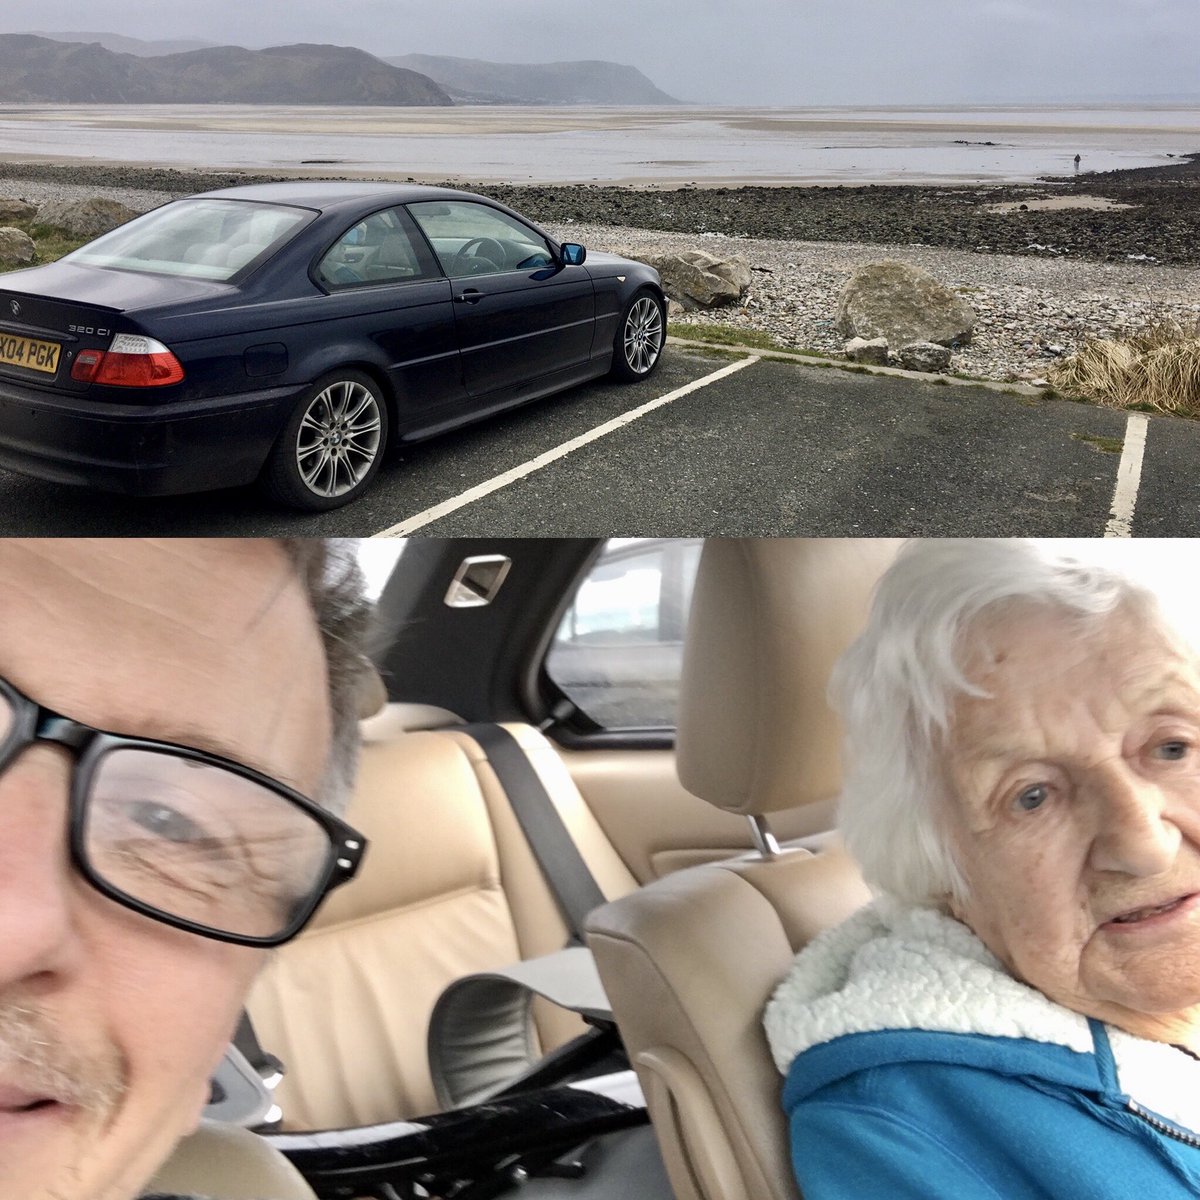 February 2020:Drove up to Llandudno see my Aunty Joan. Had a fab afternoon parked here, just the two of us chatting shite. She was the first person I came out to in the mid 90s, and in 2010 when I tested positive for HIV. Always had my back. She’s now 93.That was a good day